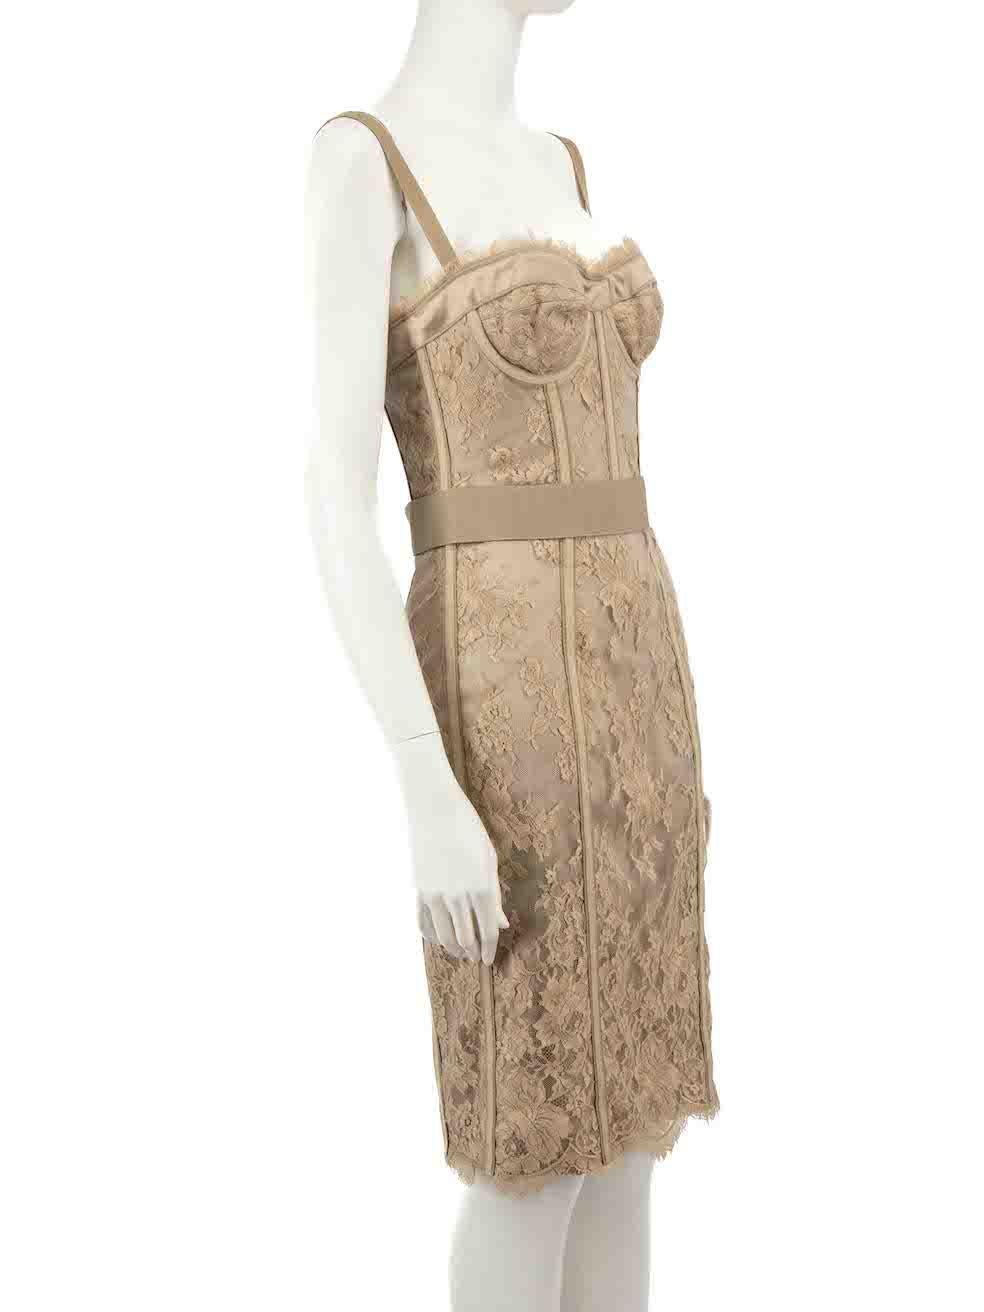 CONDITION is Never worn, with tags. No visible wear to dress is evident. However, one of the snap button on rear belt is unattached on this new Dolce & Gabbana designer resale item.
 
 
 
 Details
 
 
 Beige
 
 Lace
 
 Dress
 
 Floral pattern
 
